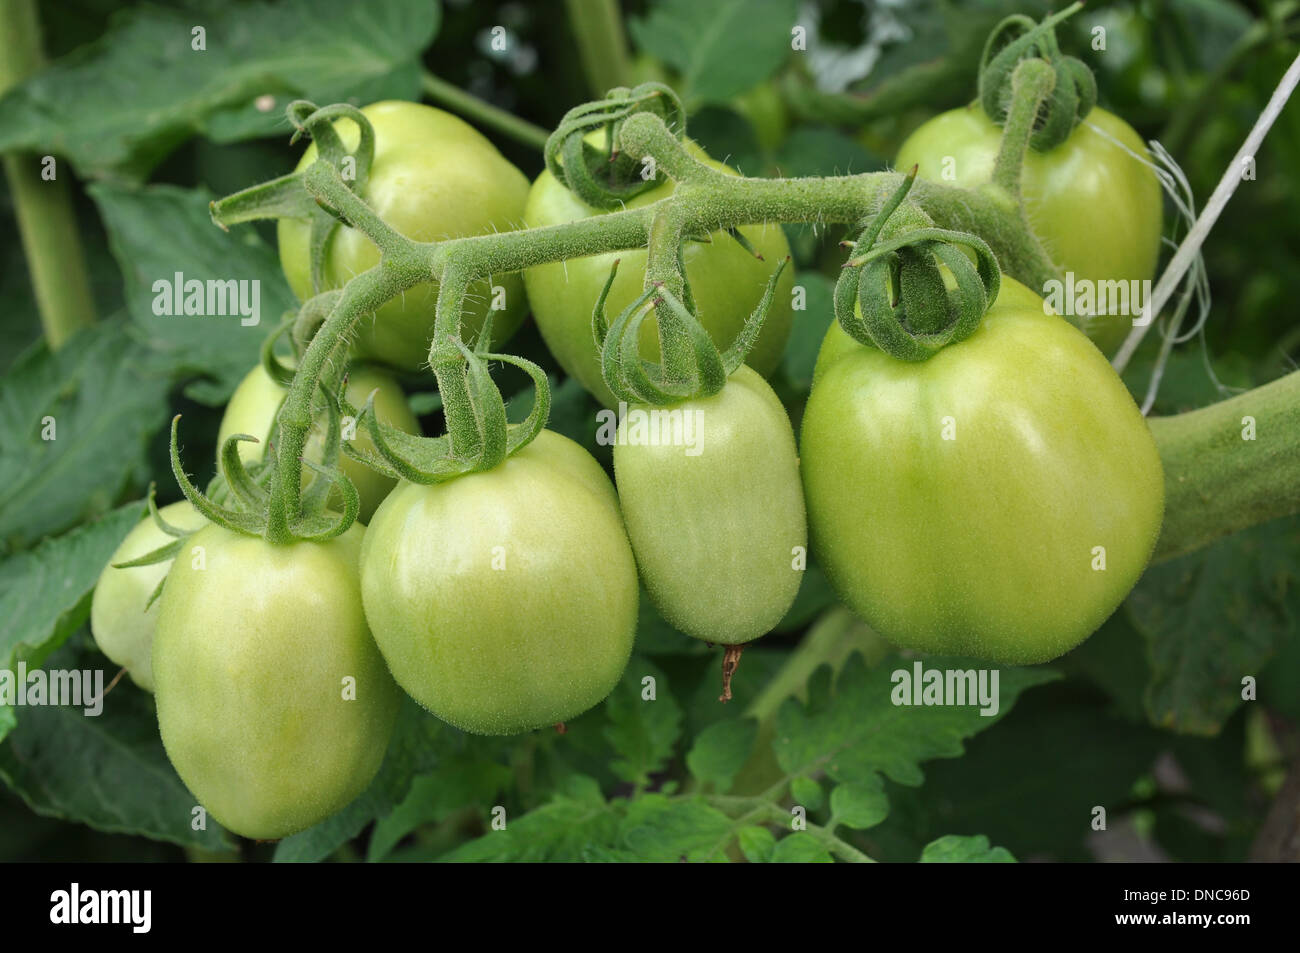 green tomatoes growing on a branch Stock Photo